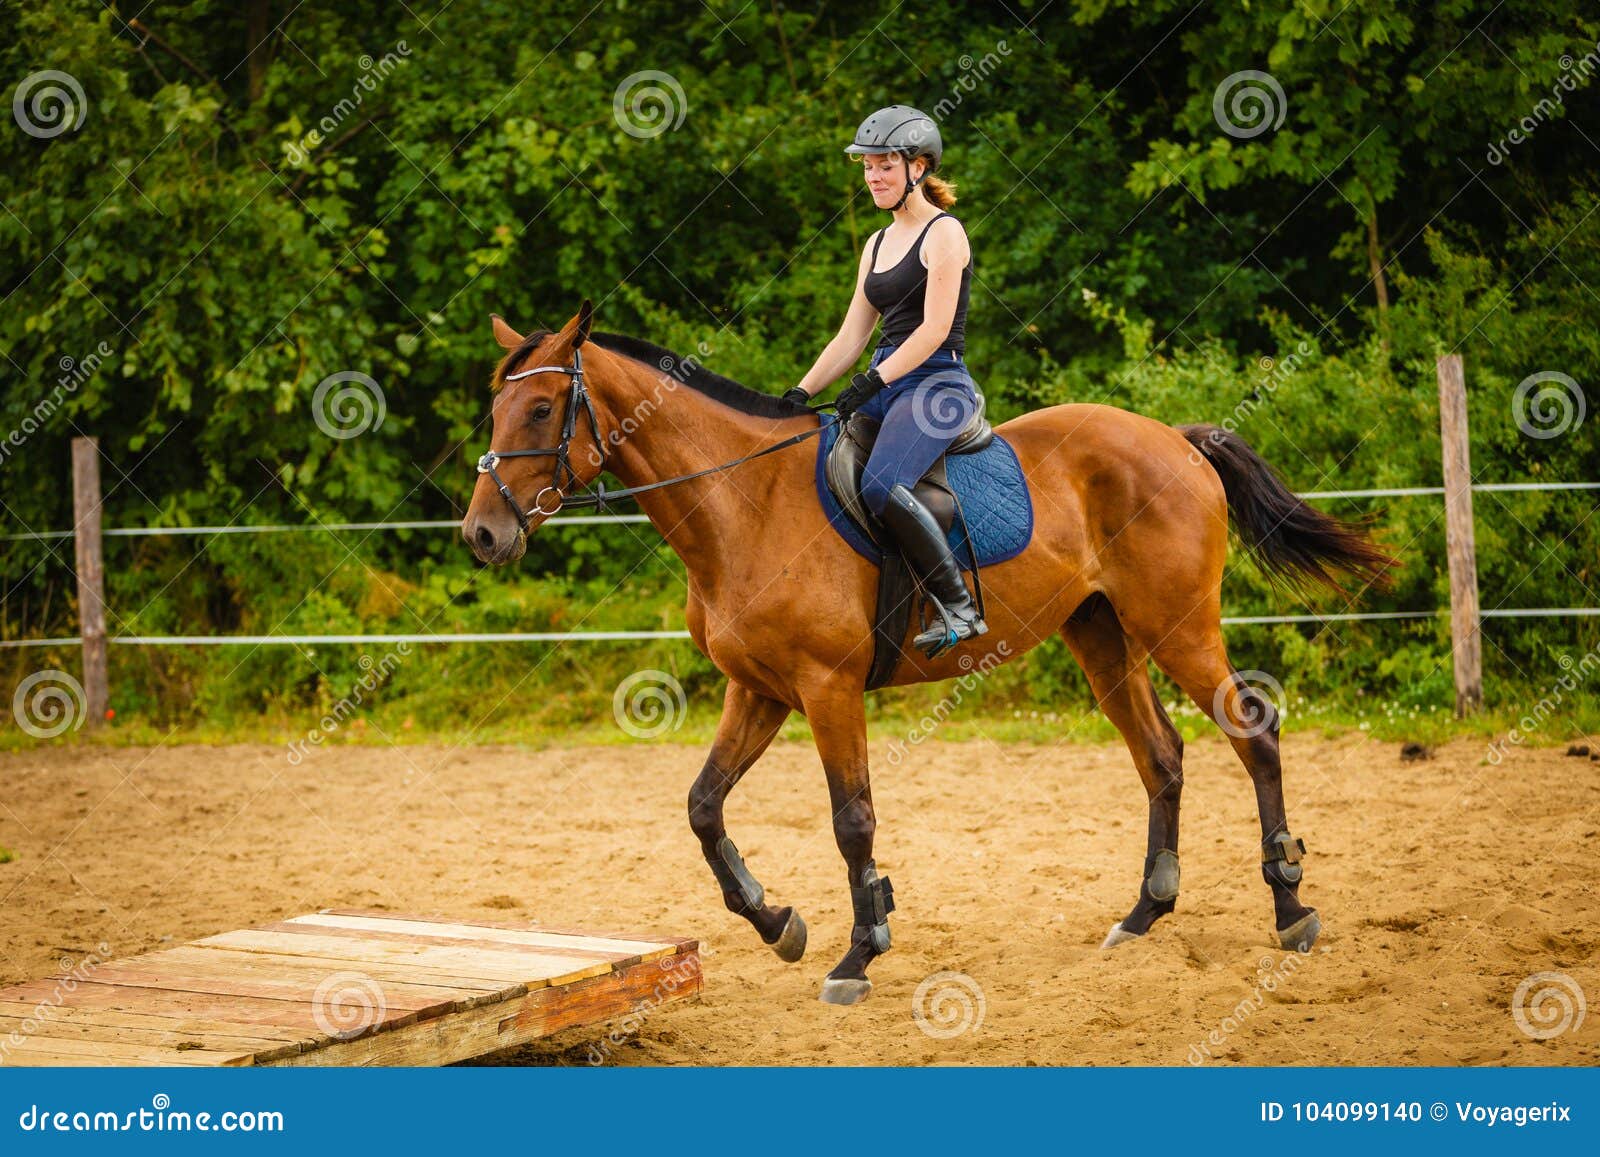 Jockey Girl Doing Horse Riding on Countryside Meadow Stock Photo - Image of  equitation, countryside: 104099140